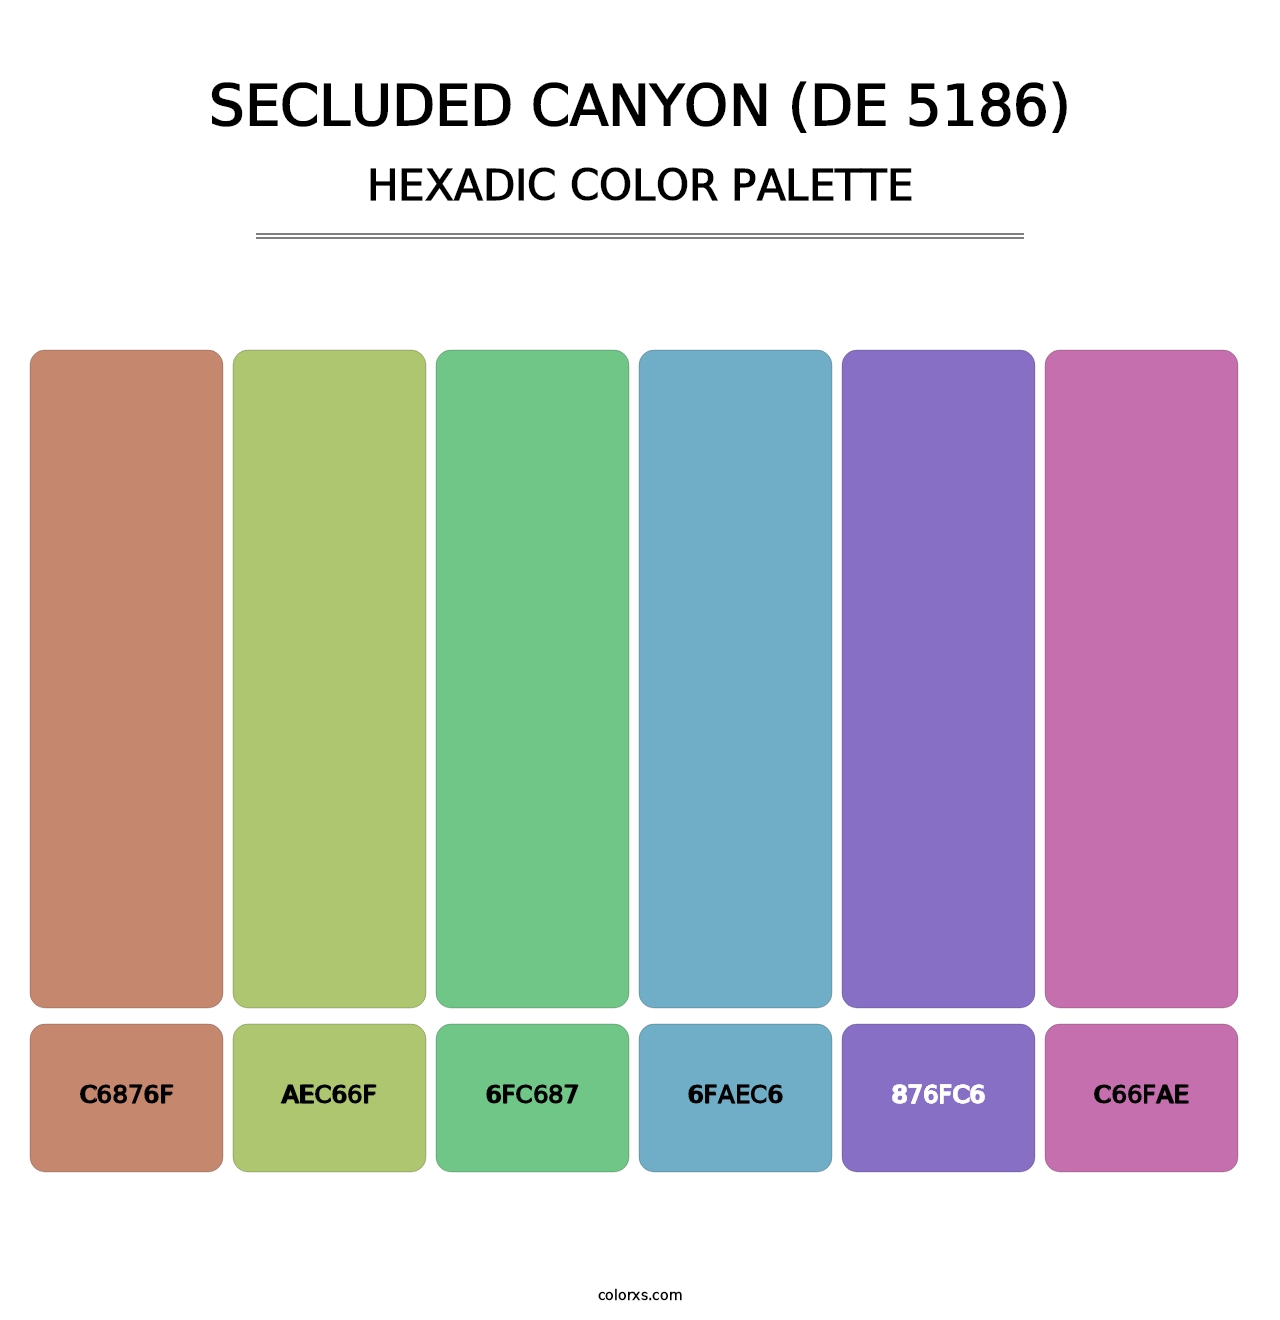 Secluded Canyon (DE 5186) - Hexadic Color Palette